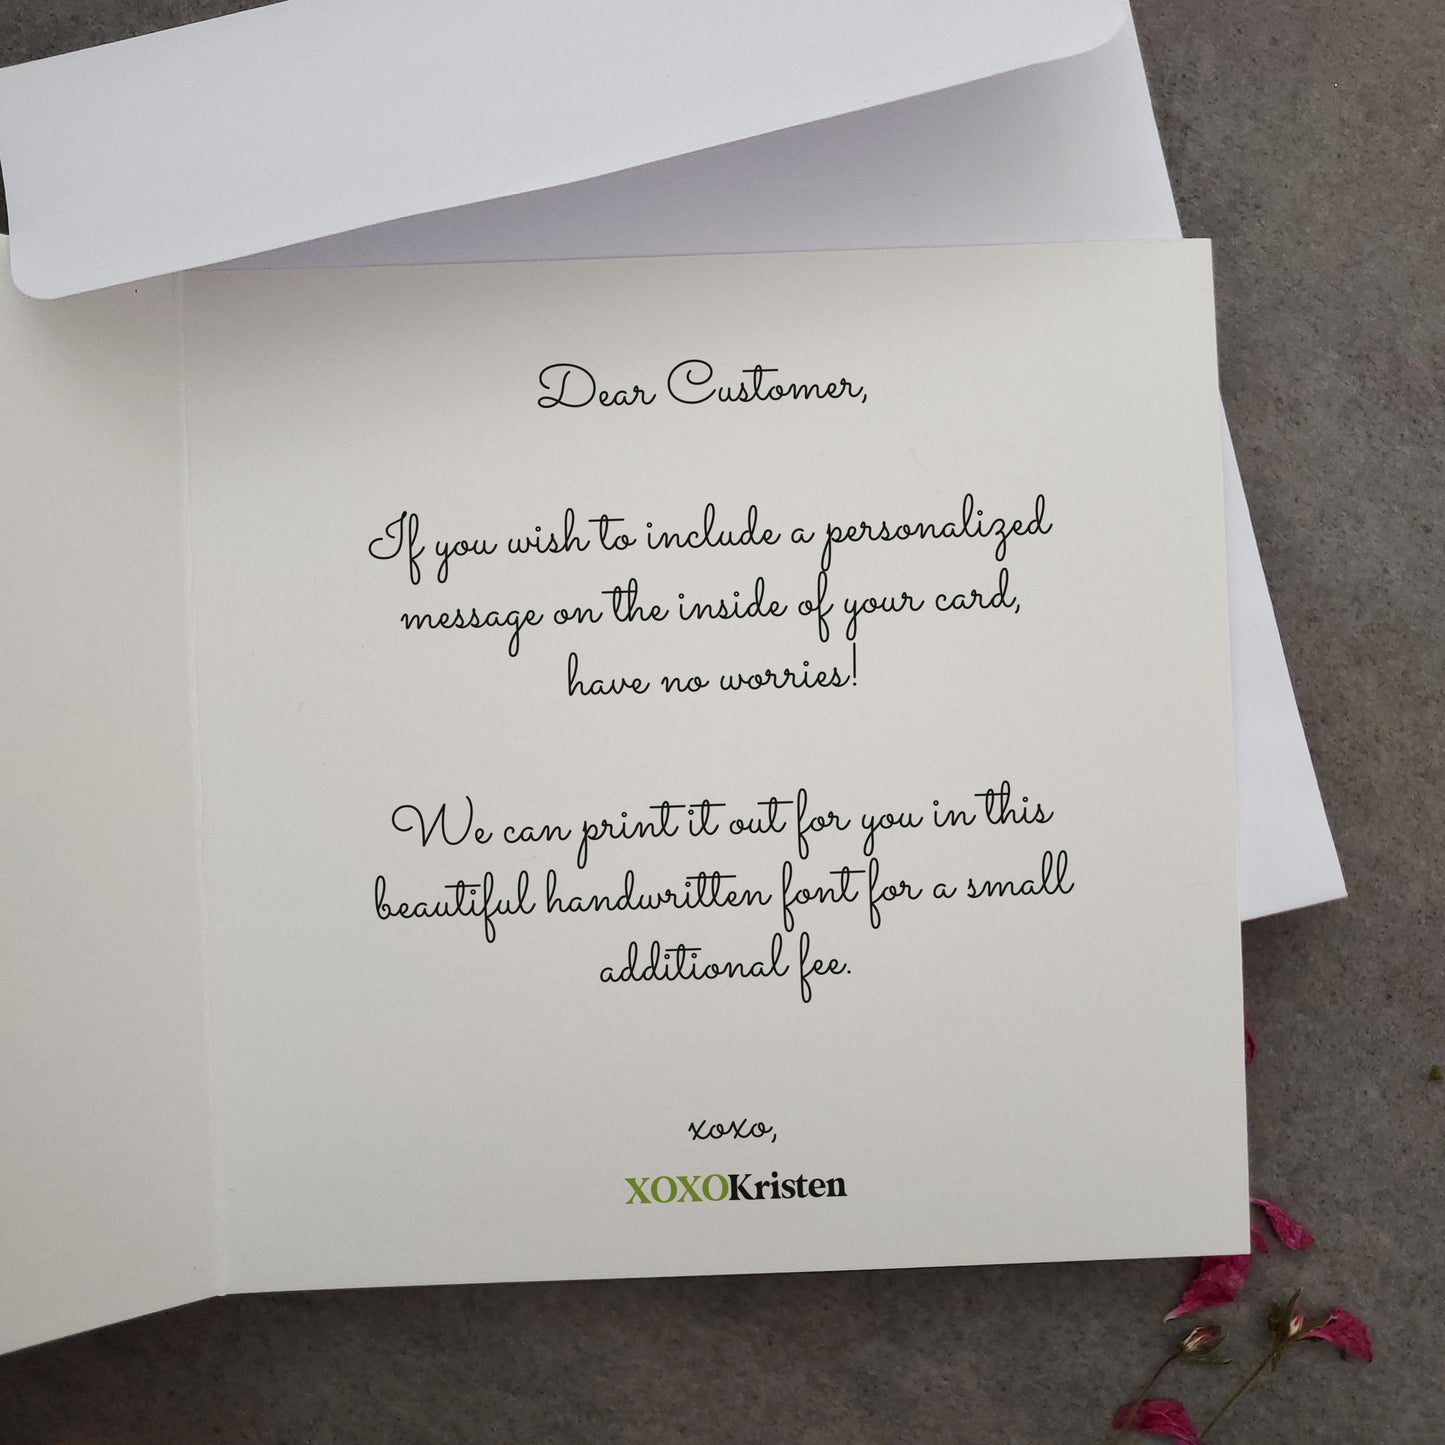 christmas cards with printed message - XOXOKristen